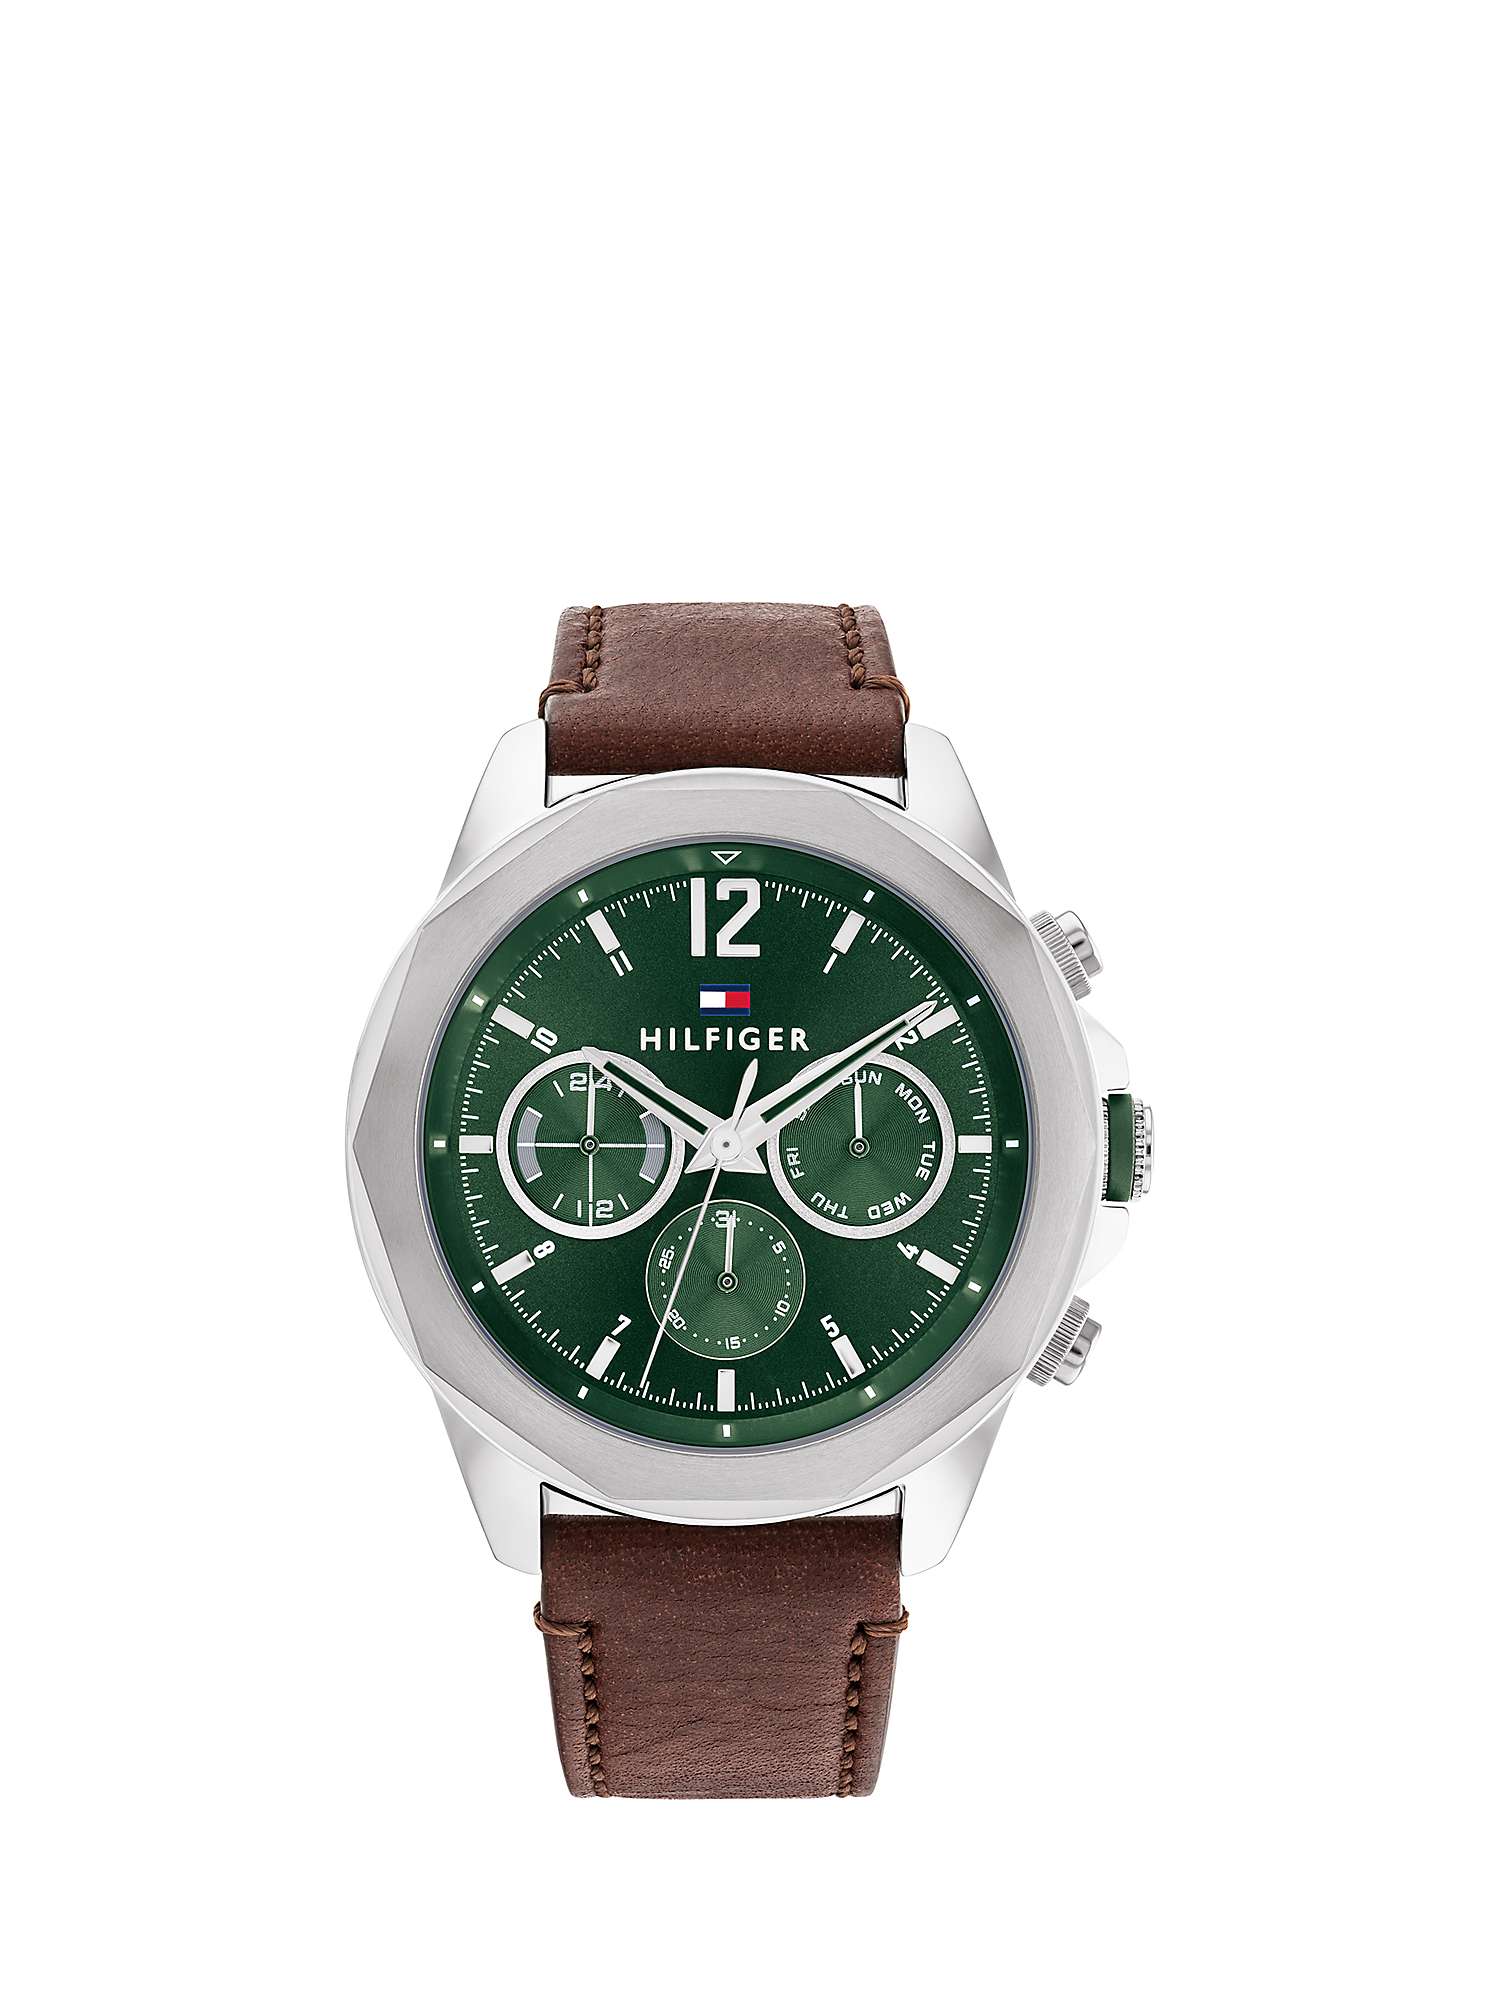 Buy Tommy Hilfiger Men's Lars Chronograph Leather Strap Watch, Brown/Green/Silver 1792064 Online at johnlewis.com